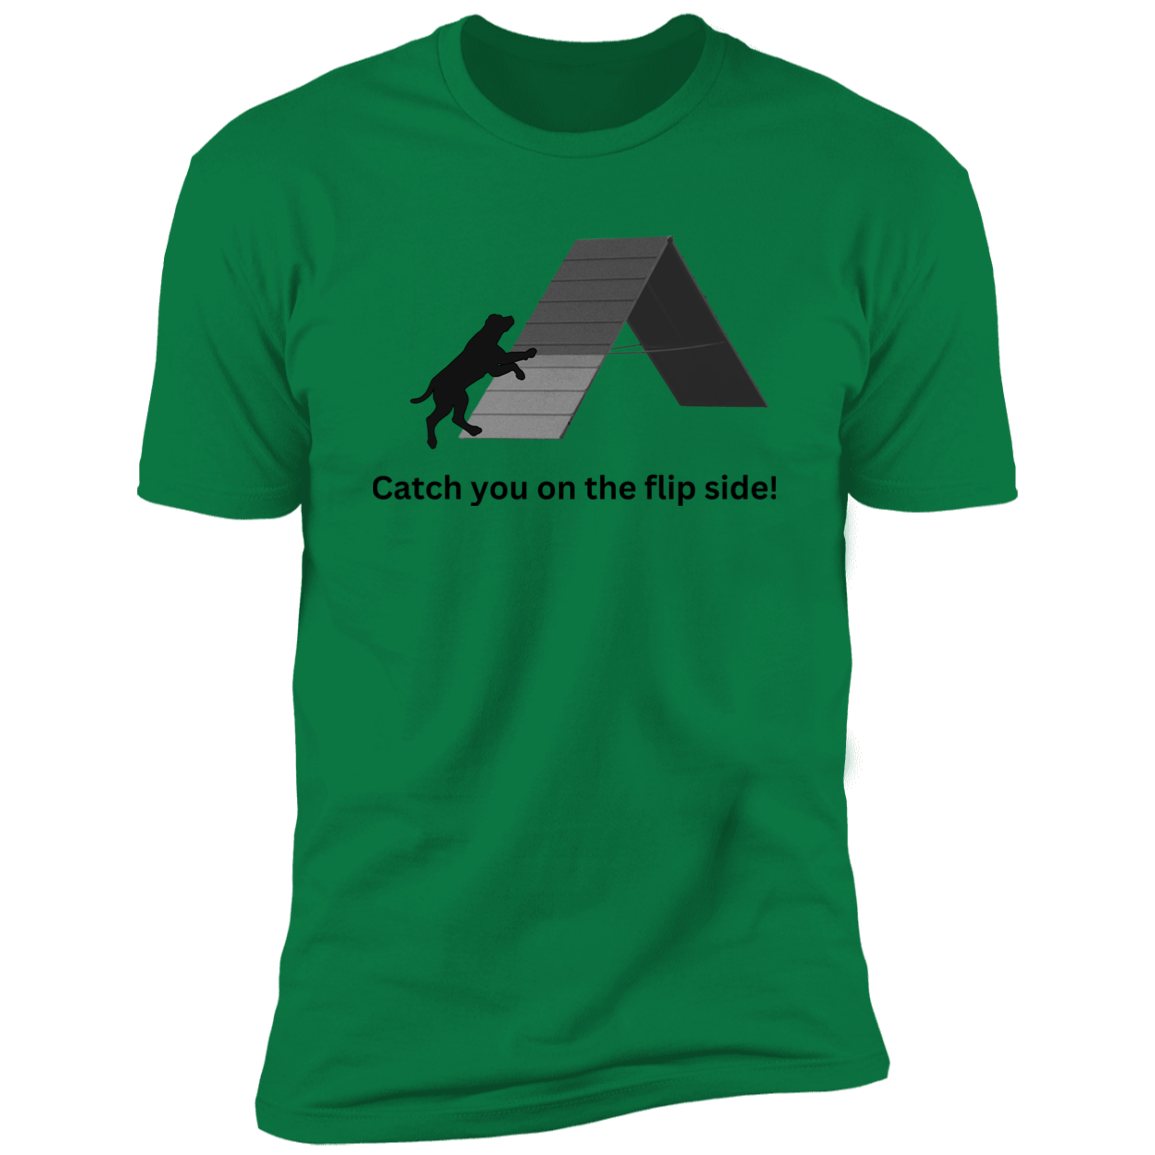 Catch You on the Flip Side T-shirt, Dog Agility Shirt for humans, in kelly green